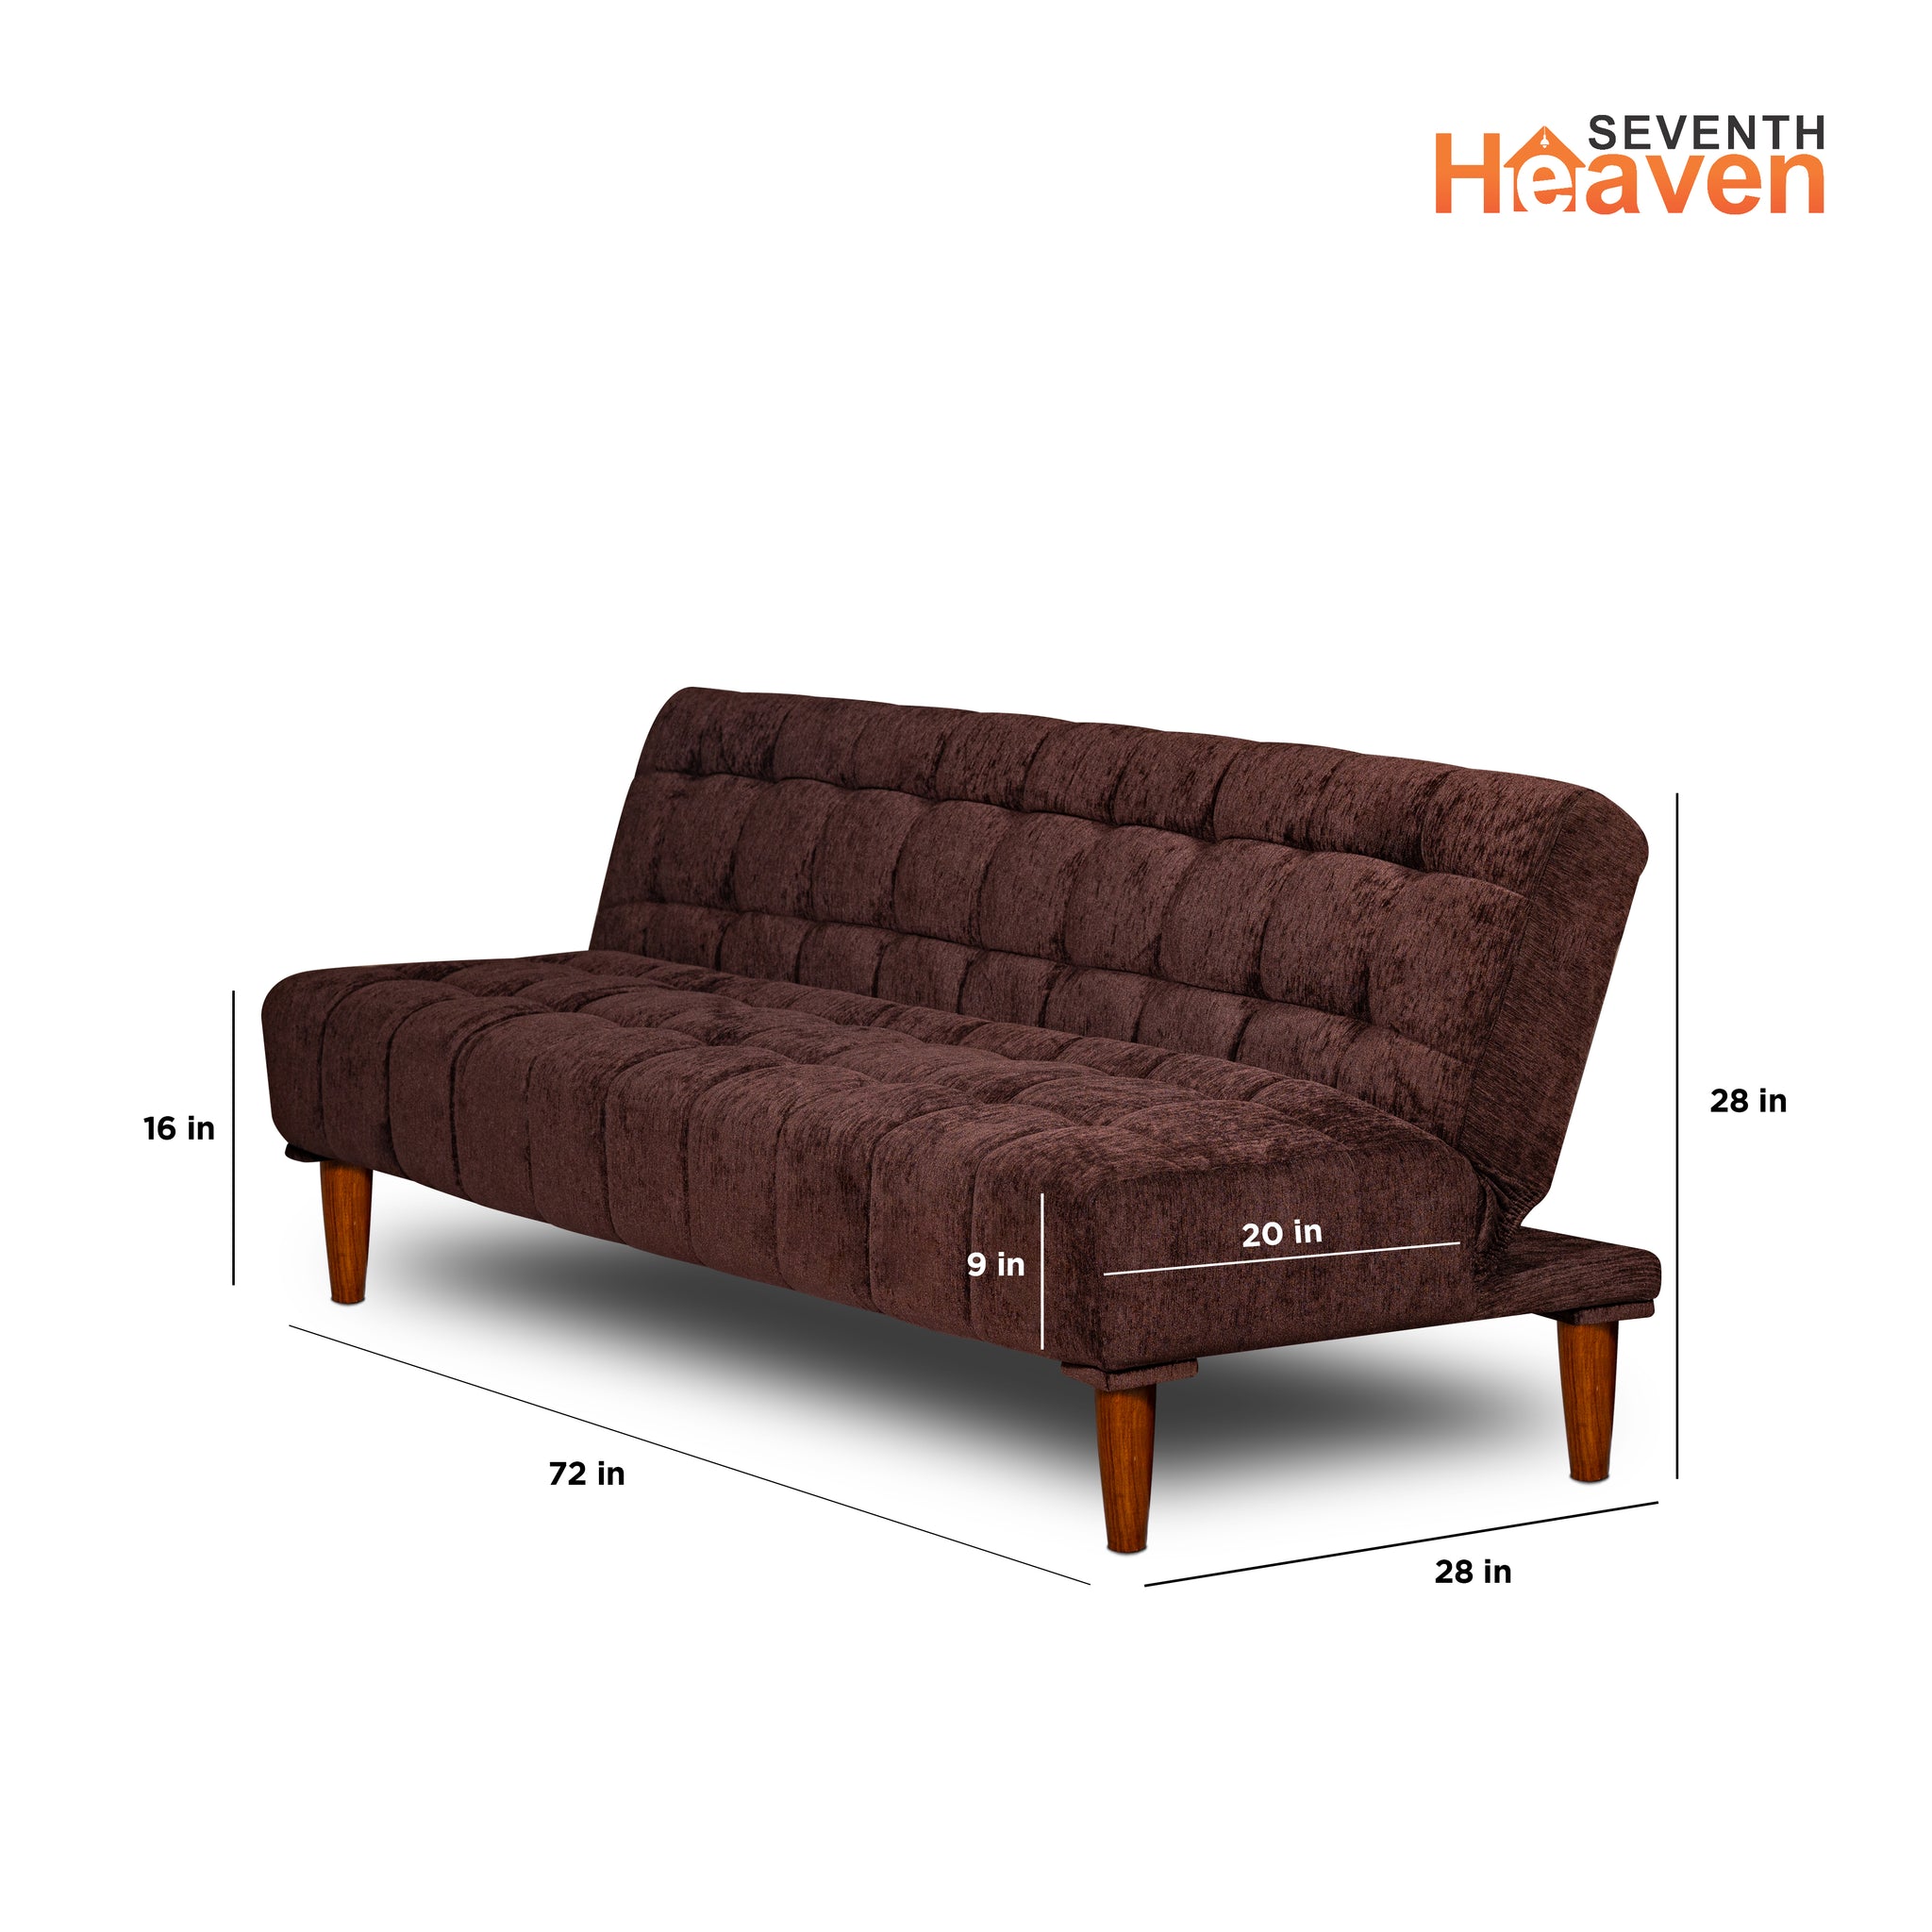 Seventh Heaven Florida 4 Seater Wooden Sofa Cum Bed. Modern & Elegant Smart Furniture Range for luxurious homes, living rooms and offices. Use as a sofa, lounger or bed. Perfect for guests. Molphino fabric with sheesham polished wooden legs. Brown colour.